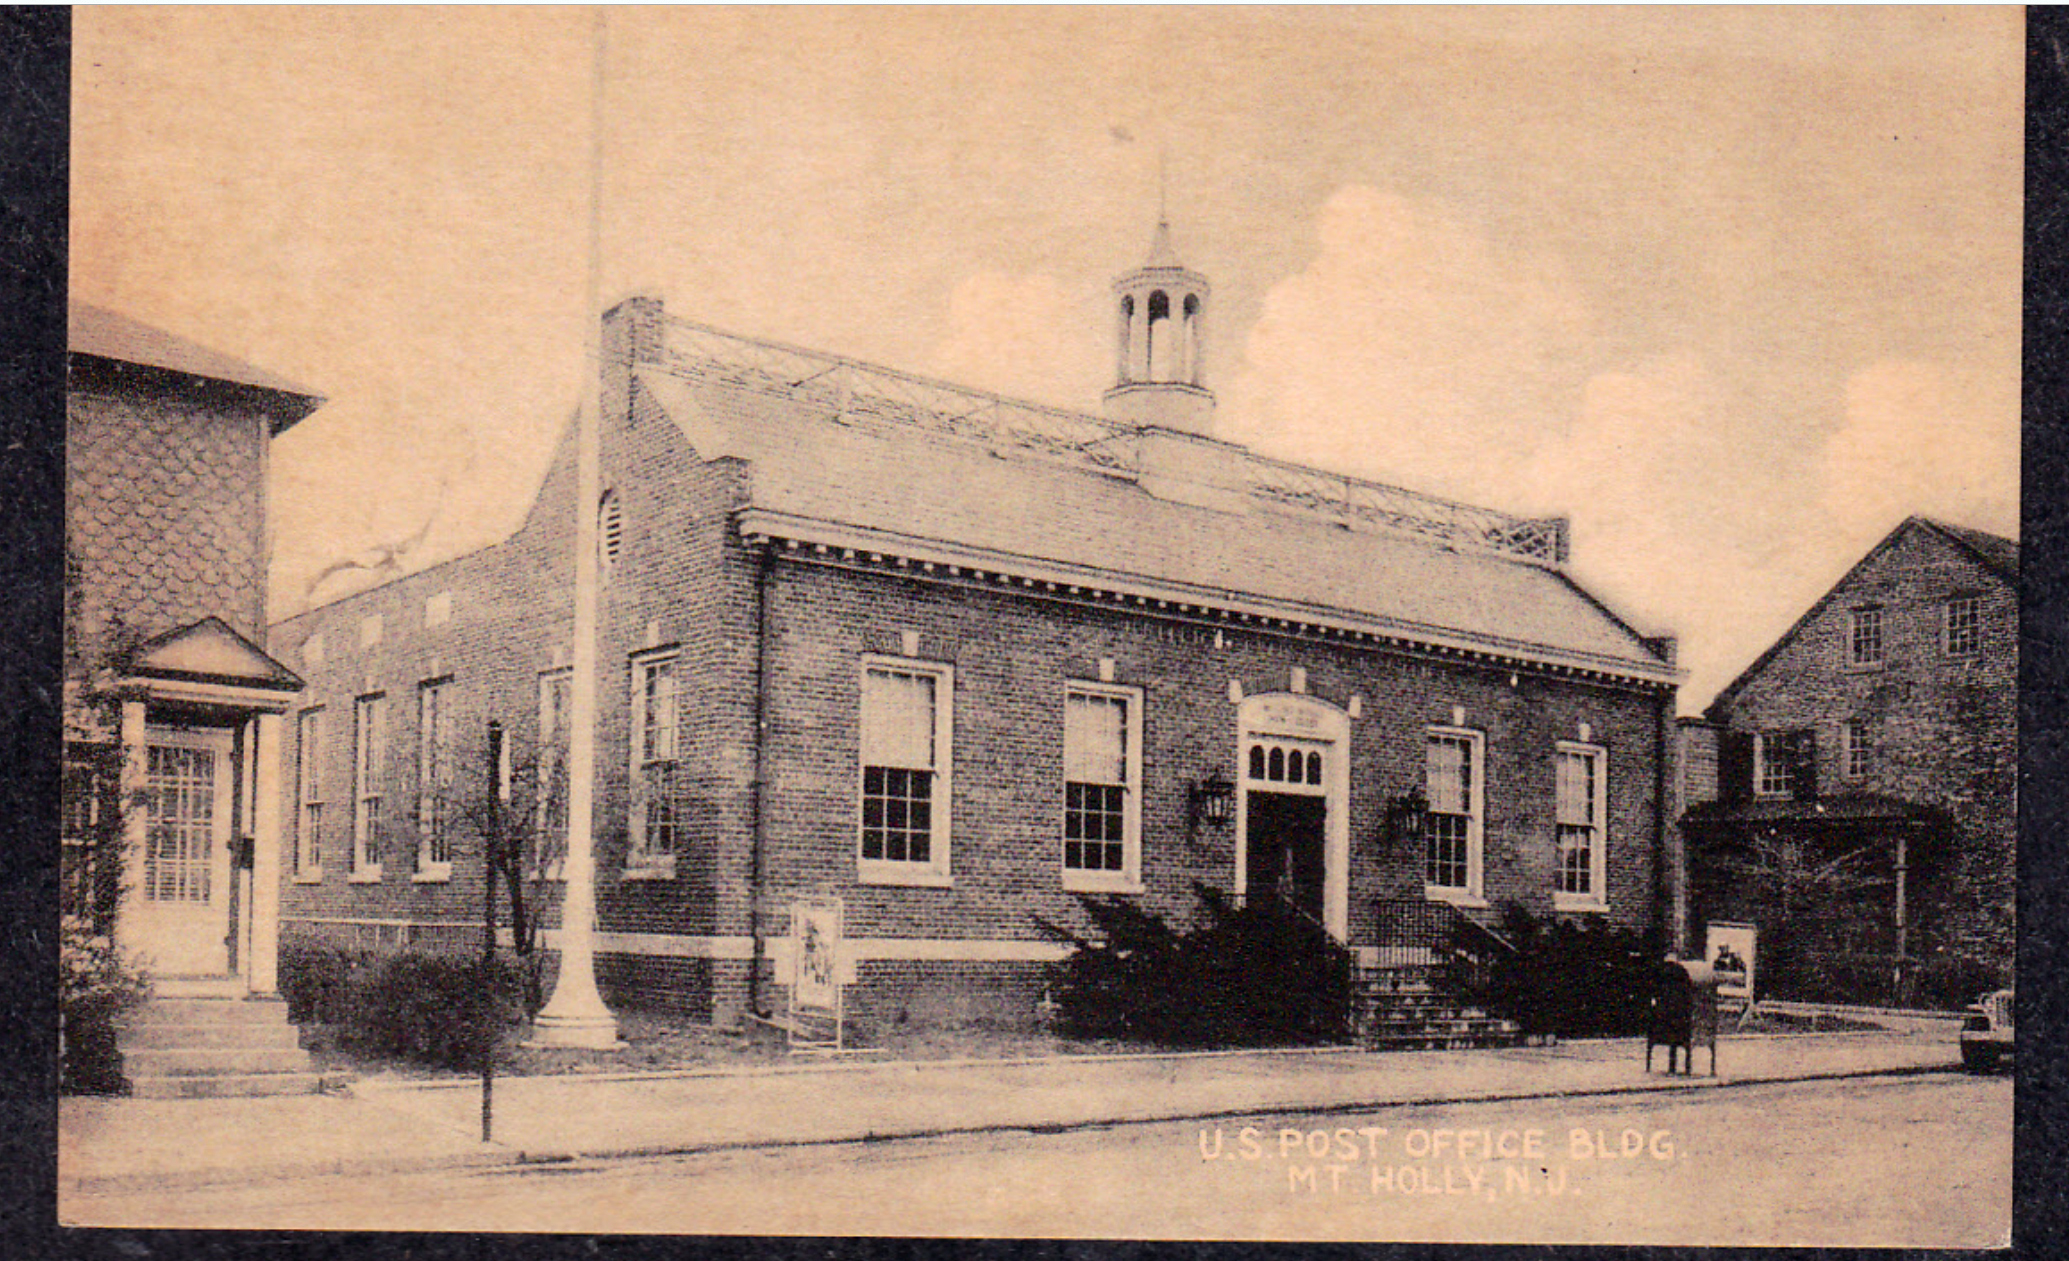 Mount Holly - The Post Office - 1930s